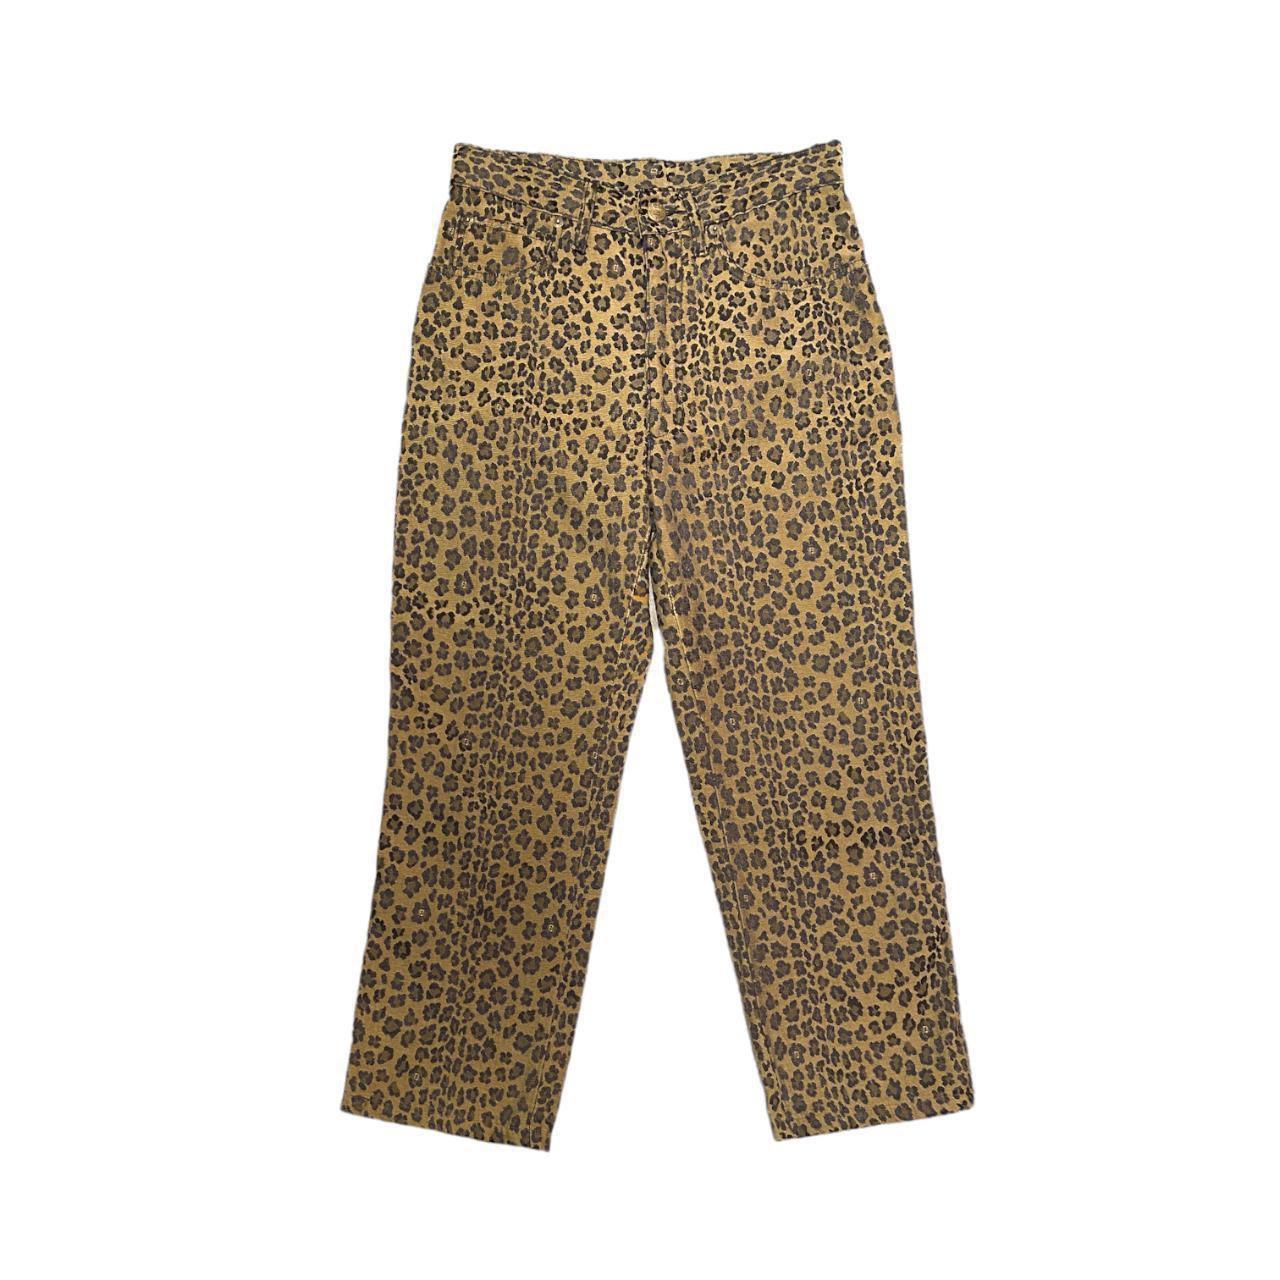 Fendi Trousers   Leopard High-Waisted Jeans For Sale 1